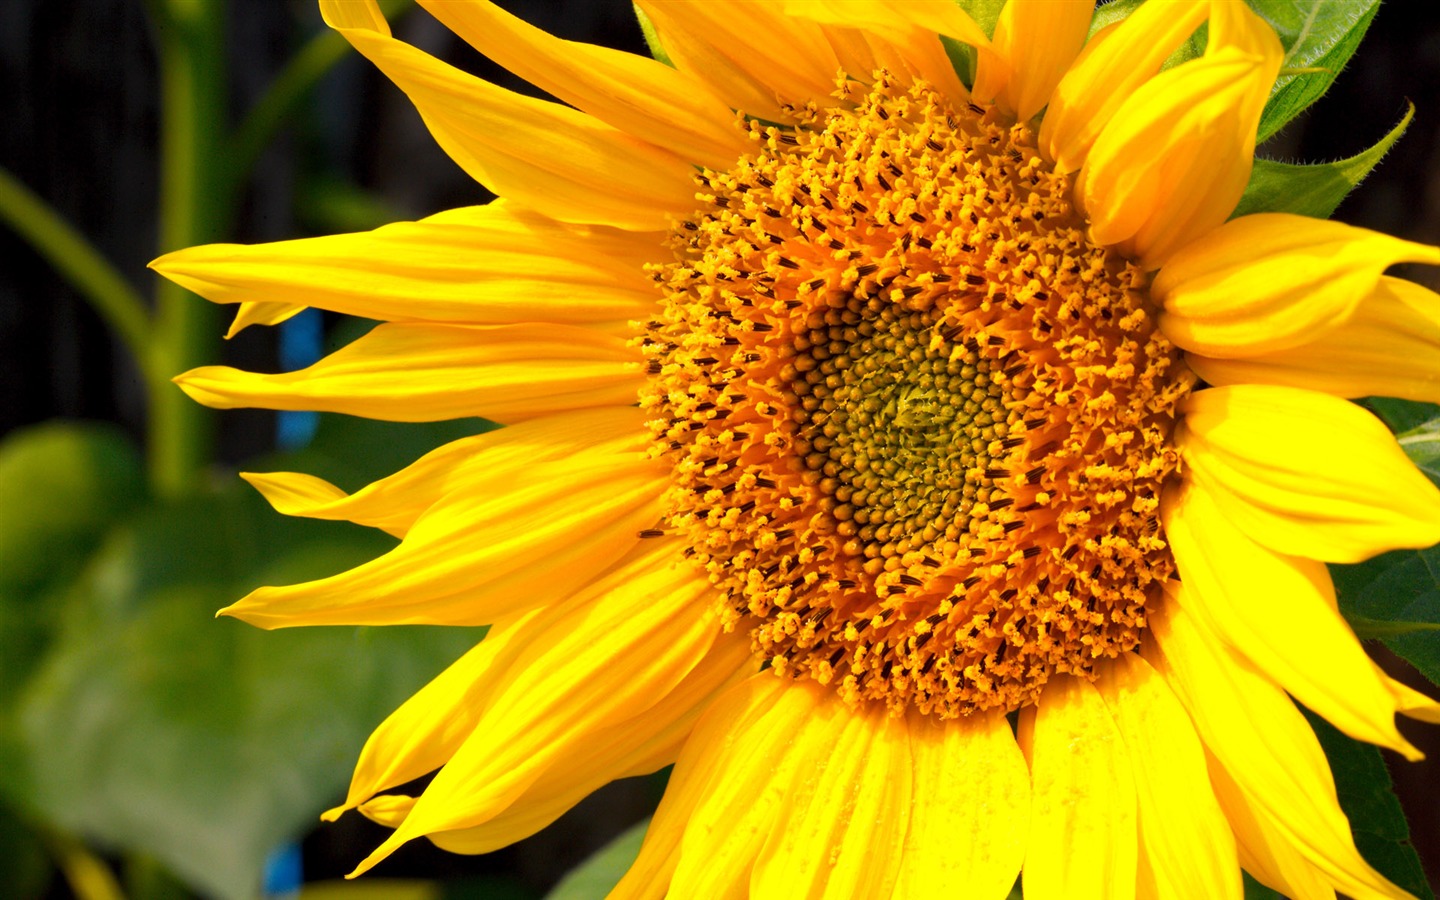 Sunny sunflower photo HD Wallpapers #37 - 1440x900